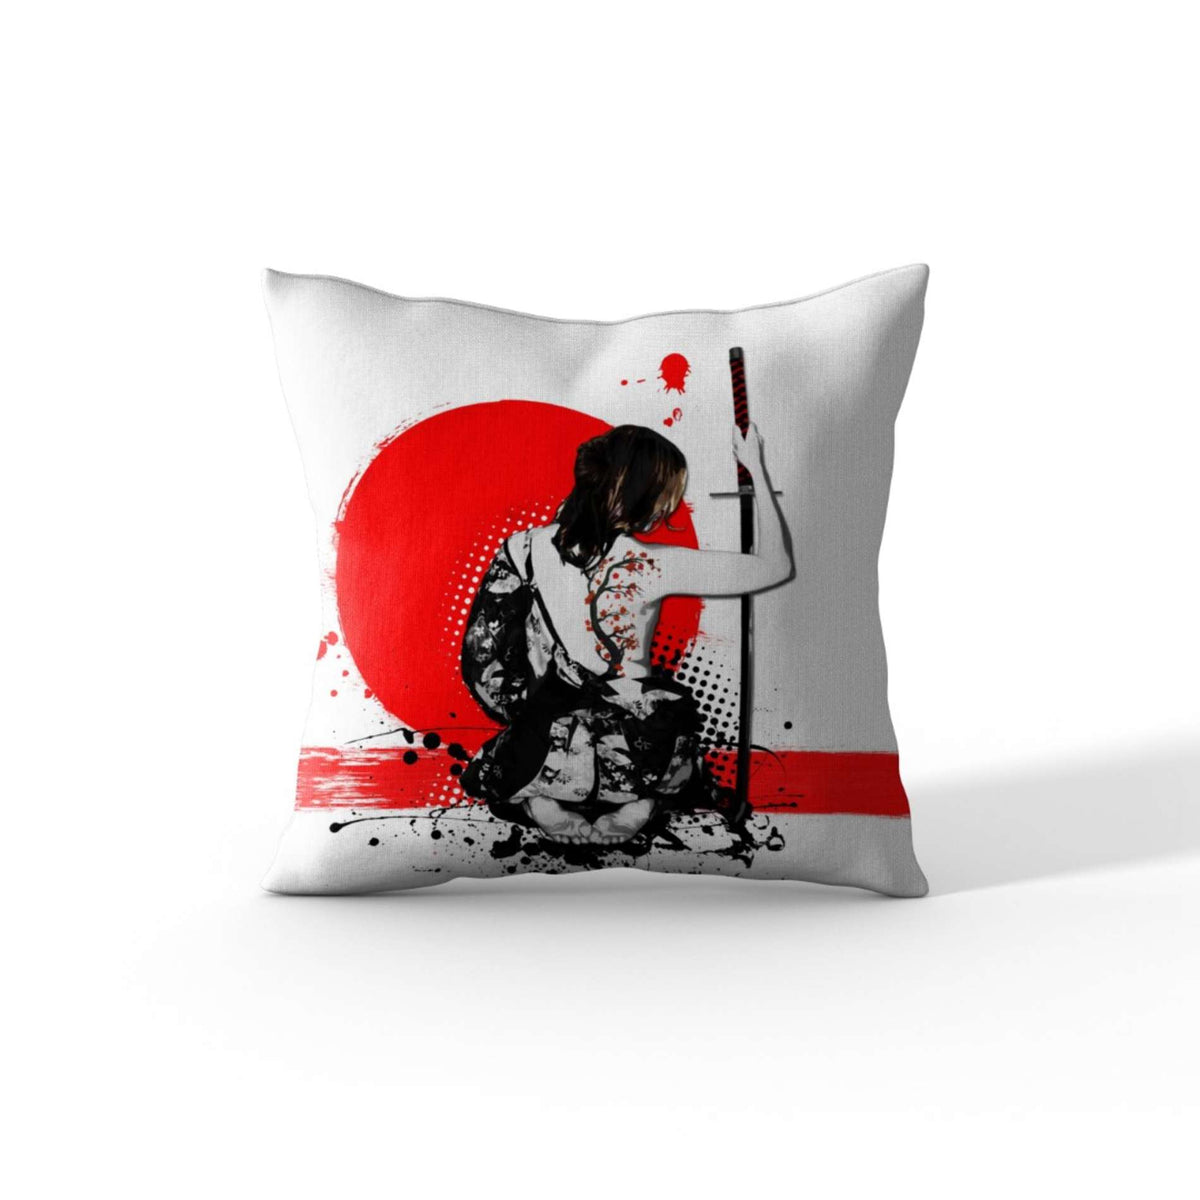 Cortesi Home &#39;Trash Polka - Female Samurai&#39; by Nicklas Gustafsson, Decorative Soft Velvet Square 18&quot;x18&quot; Accent Throw Pillow with Insert